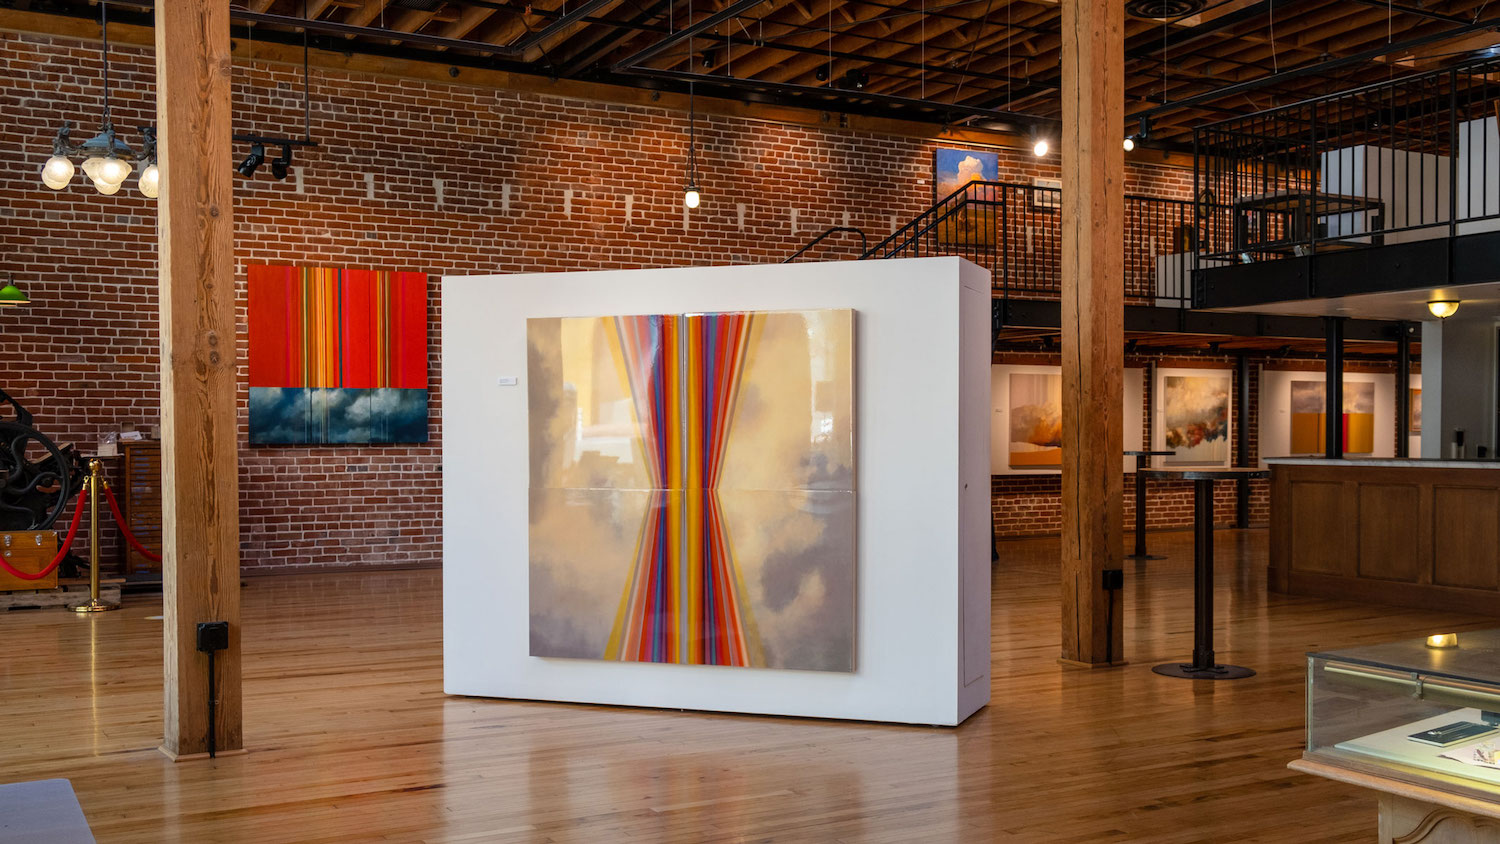 Interior of Sparks art gallery in the Gaslamp Quarter, San Diego featuring larger artwork in the middle of a brick room 